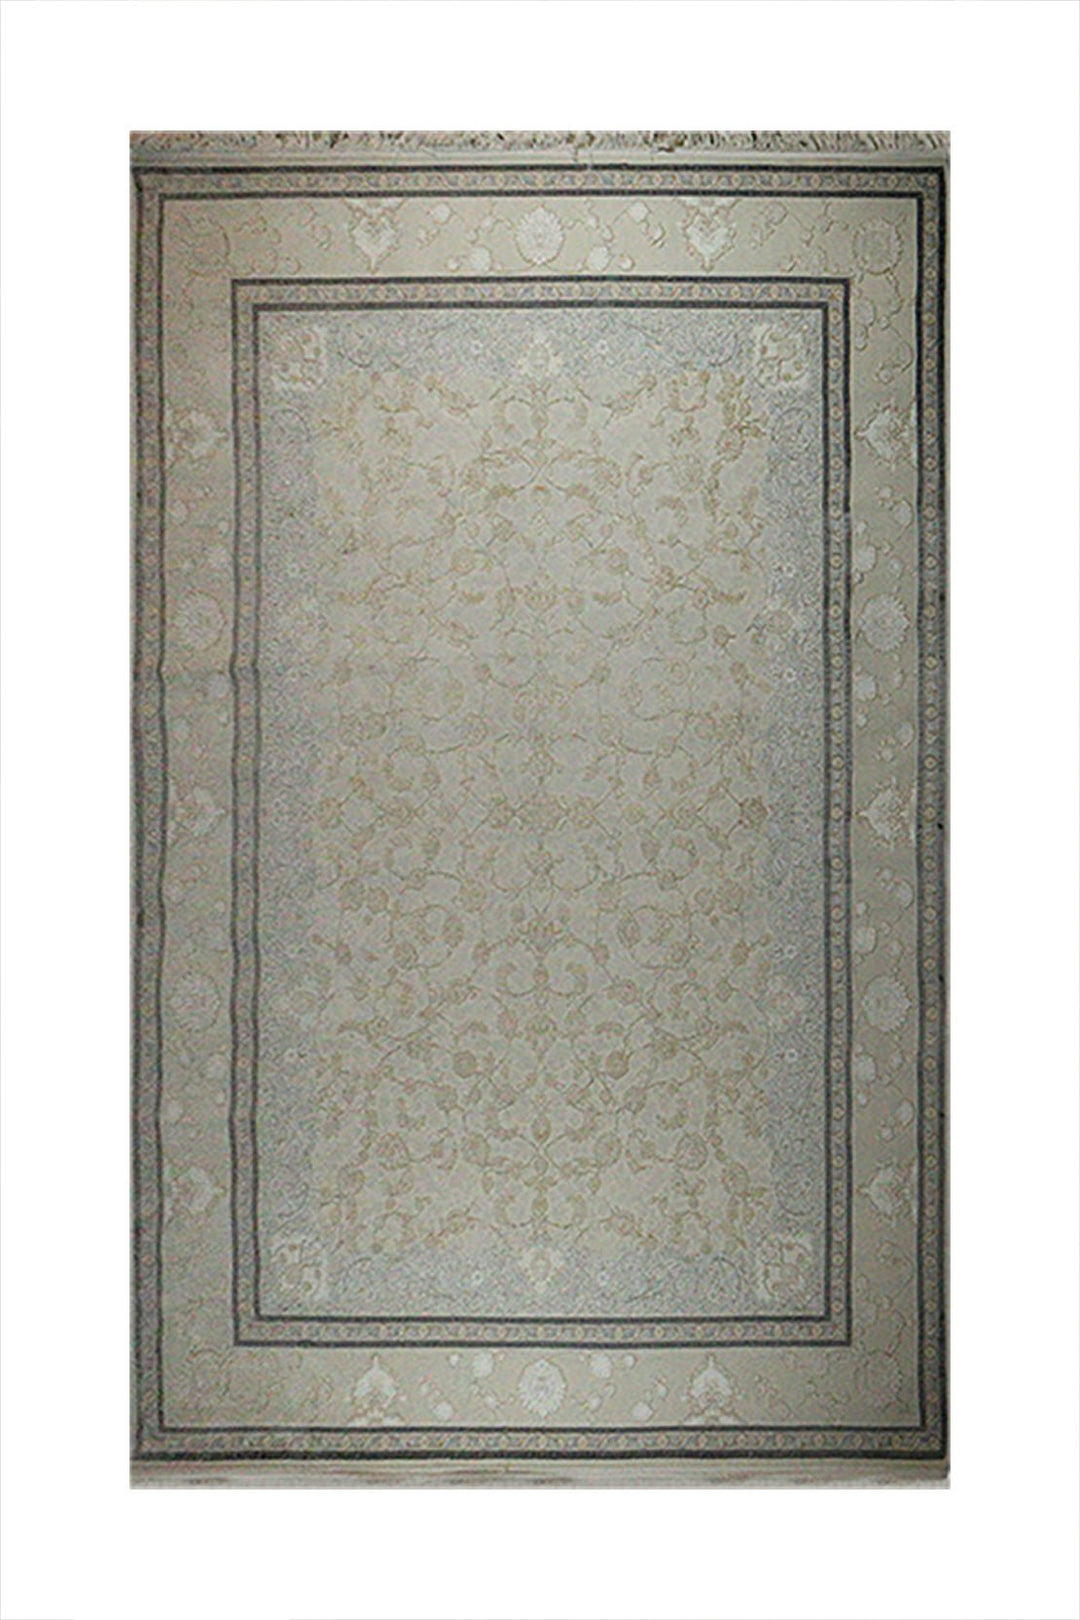 Iranian Premium Quality Oriental Collection Rug - 9.8 x 13. FT - Gray - Resilient Construction for Long-Lasting Use - V Surfaces